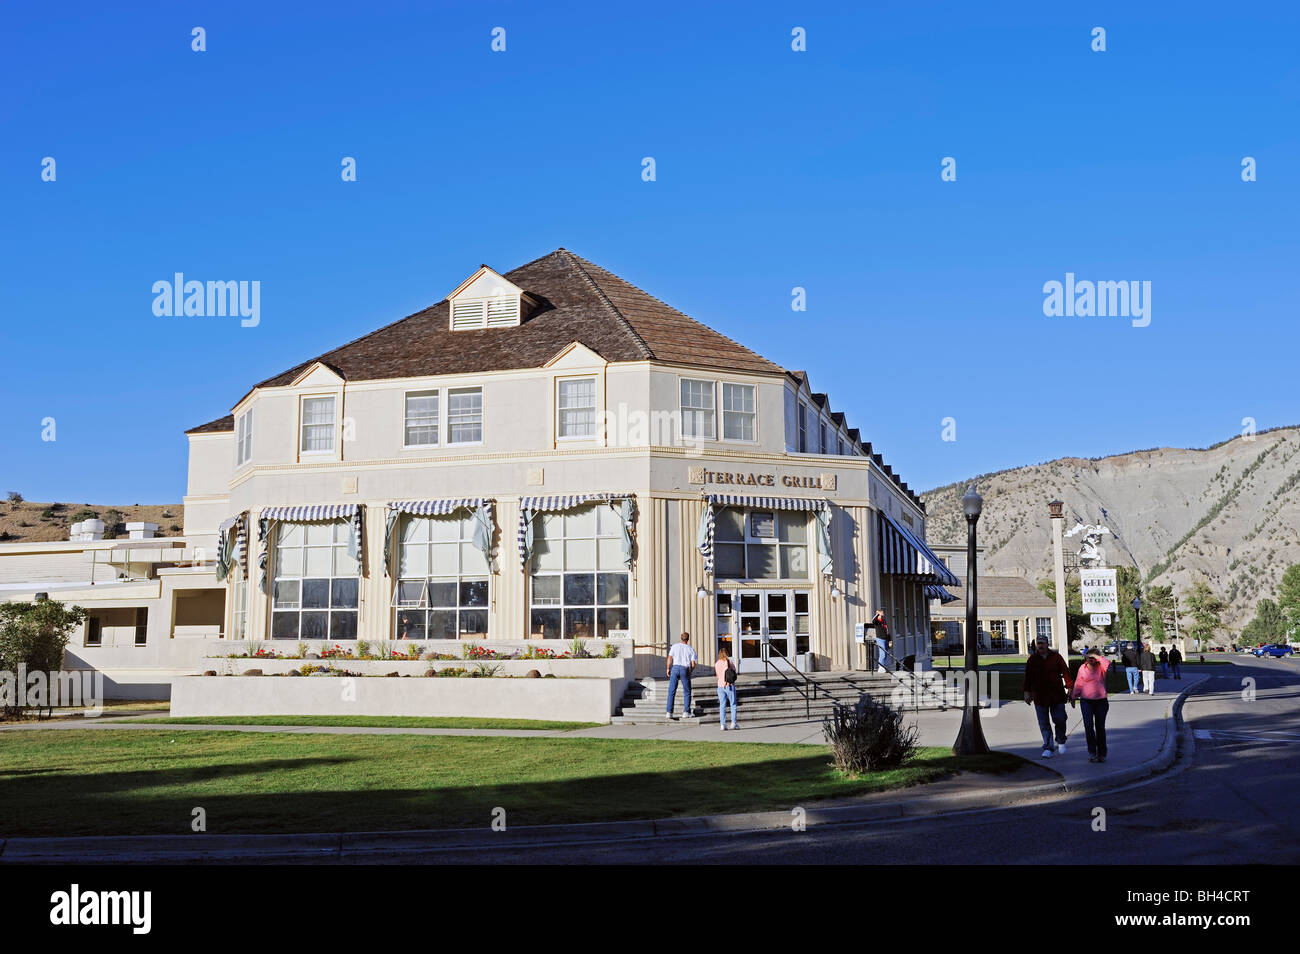 Restaurant / Mammoth Hot Springs Banque D'Images